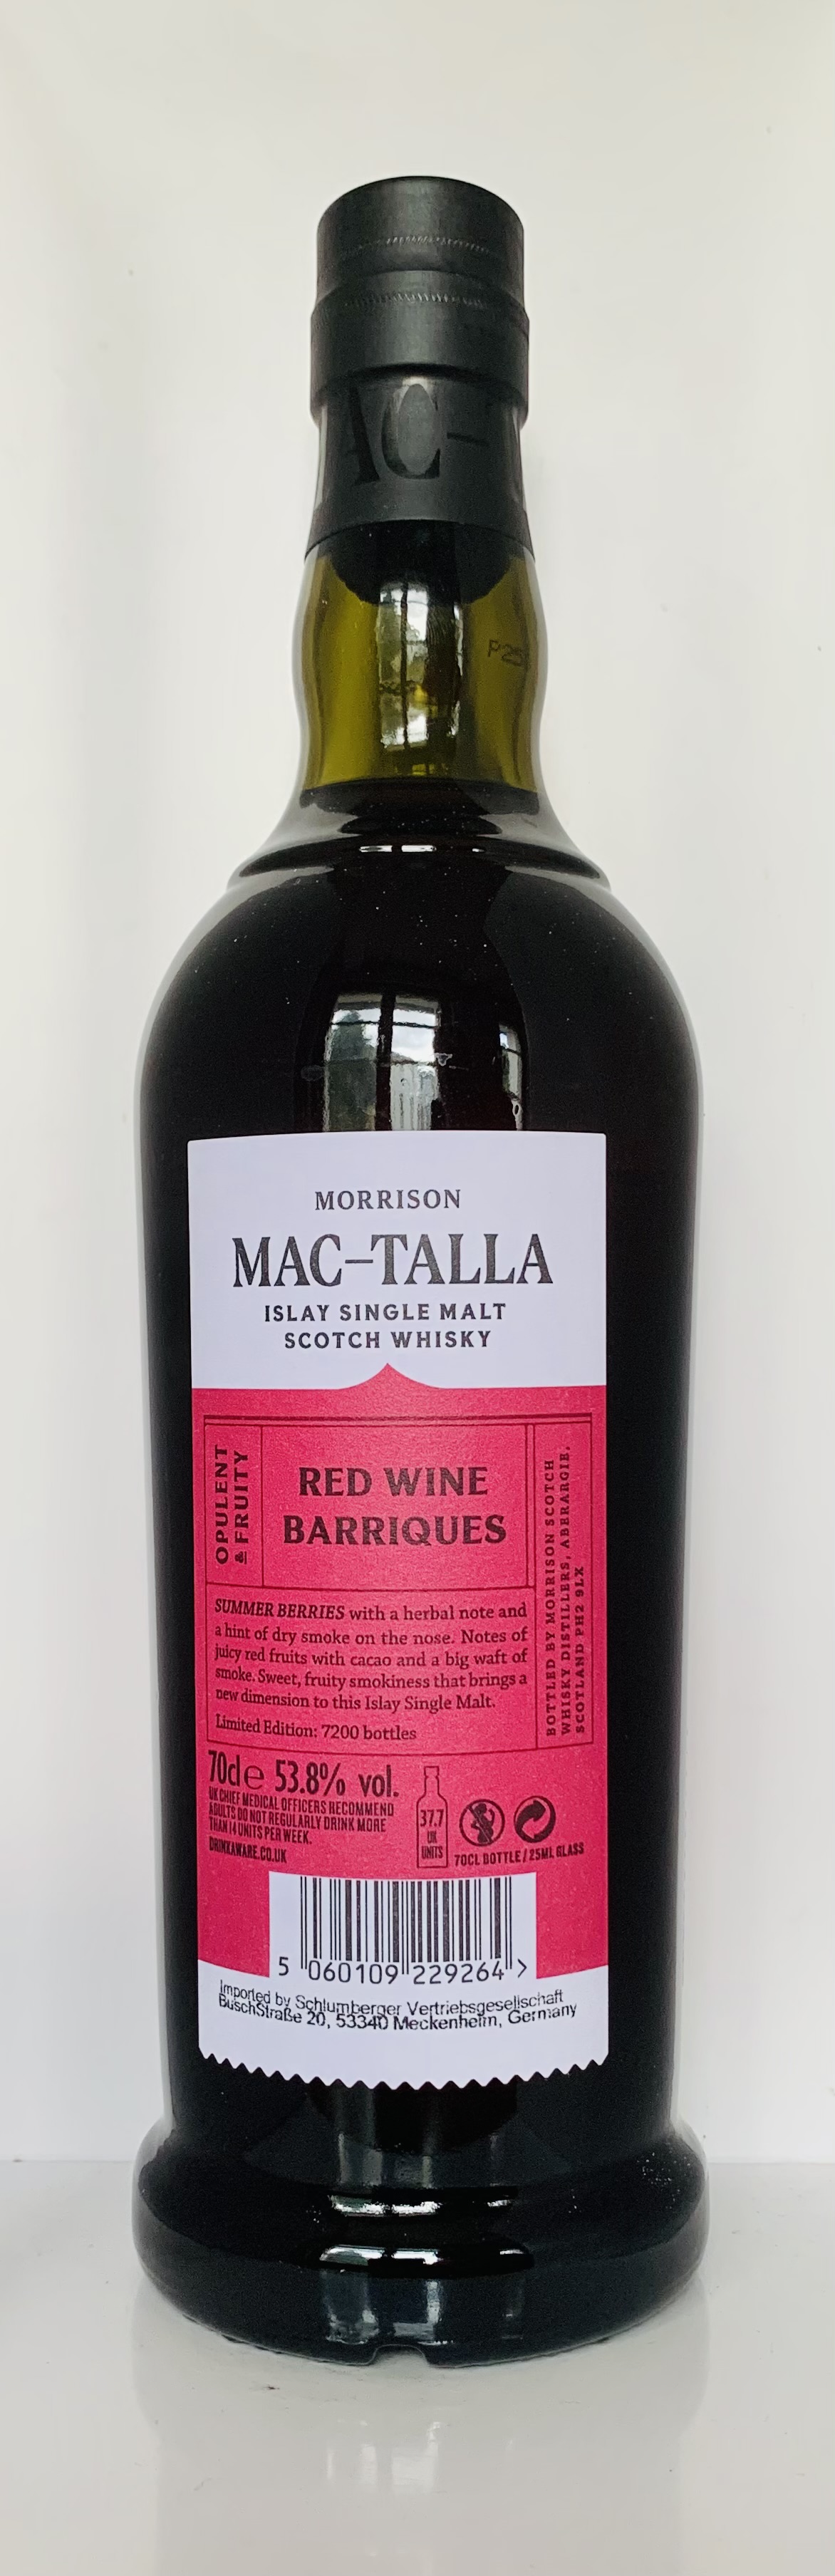 Mac-Talla Red Wine Barriques, Limited Edition 